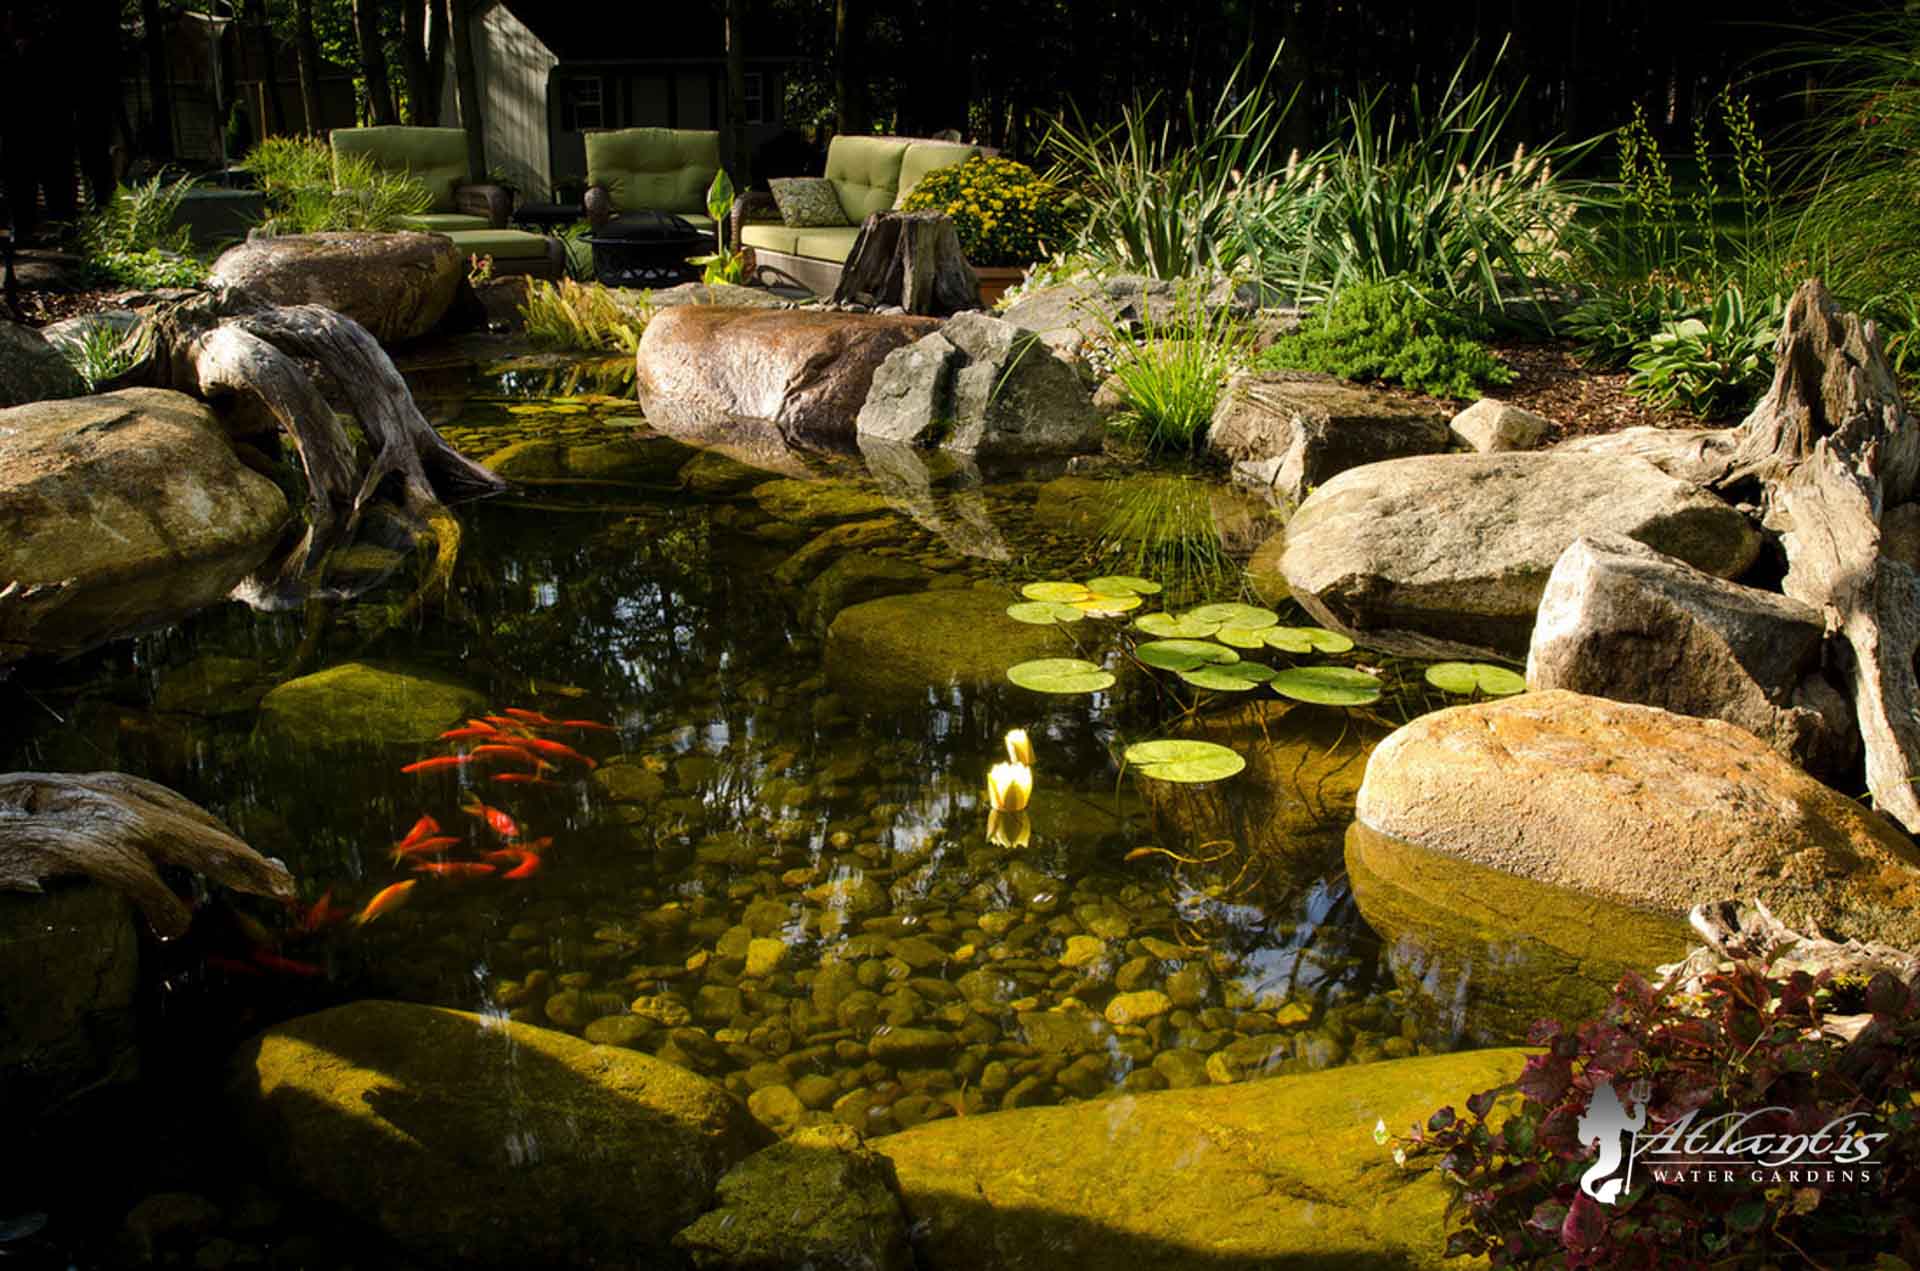 How Deep Does a Koi Pond Need To Be?